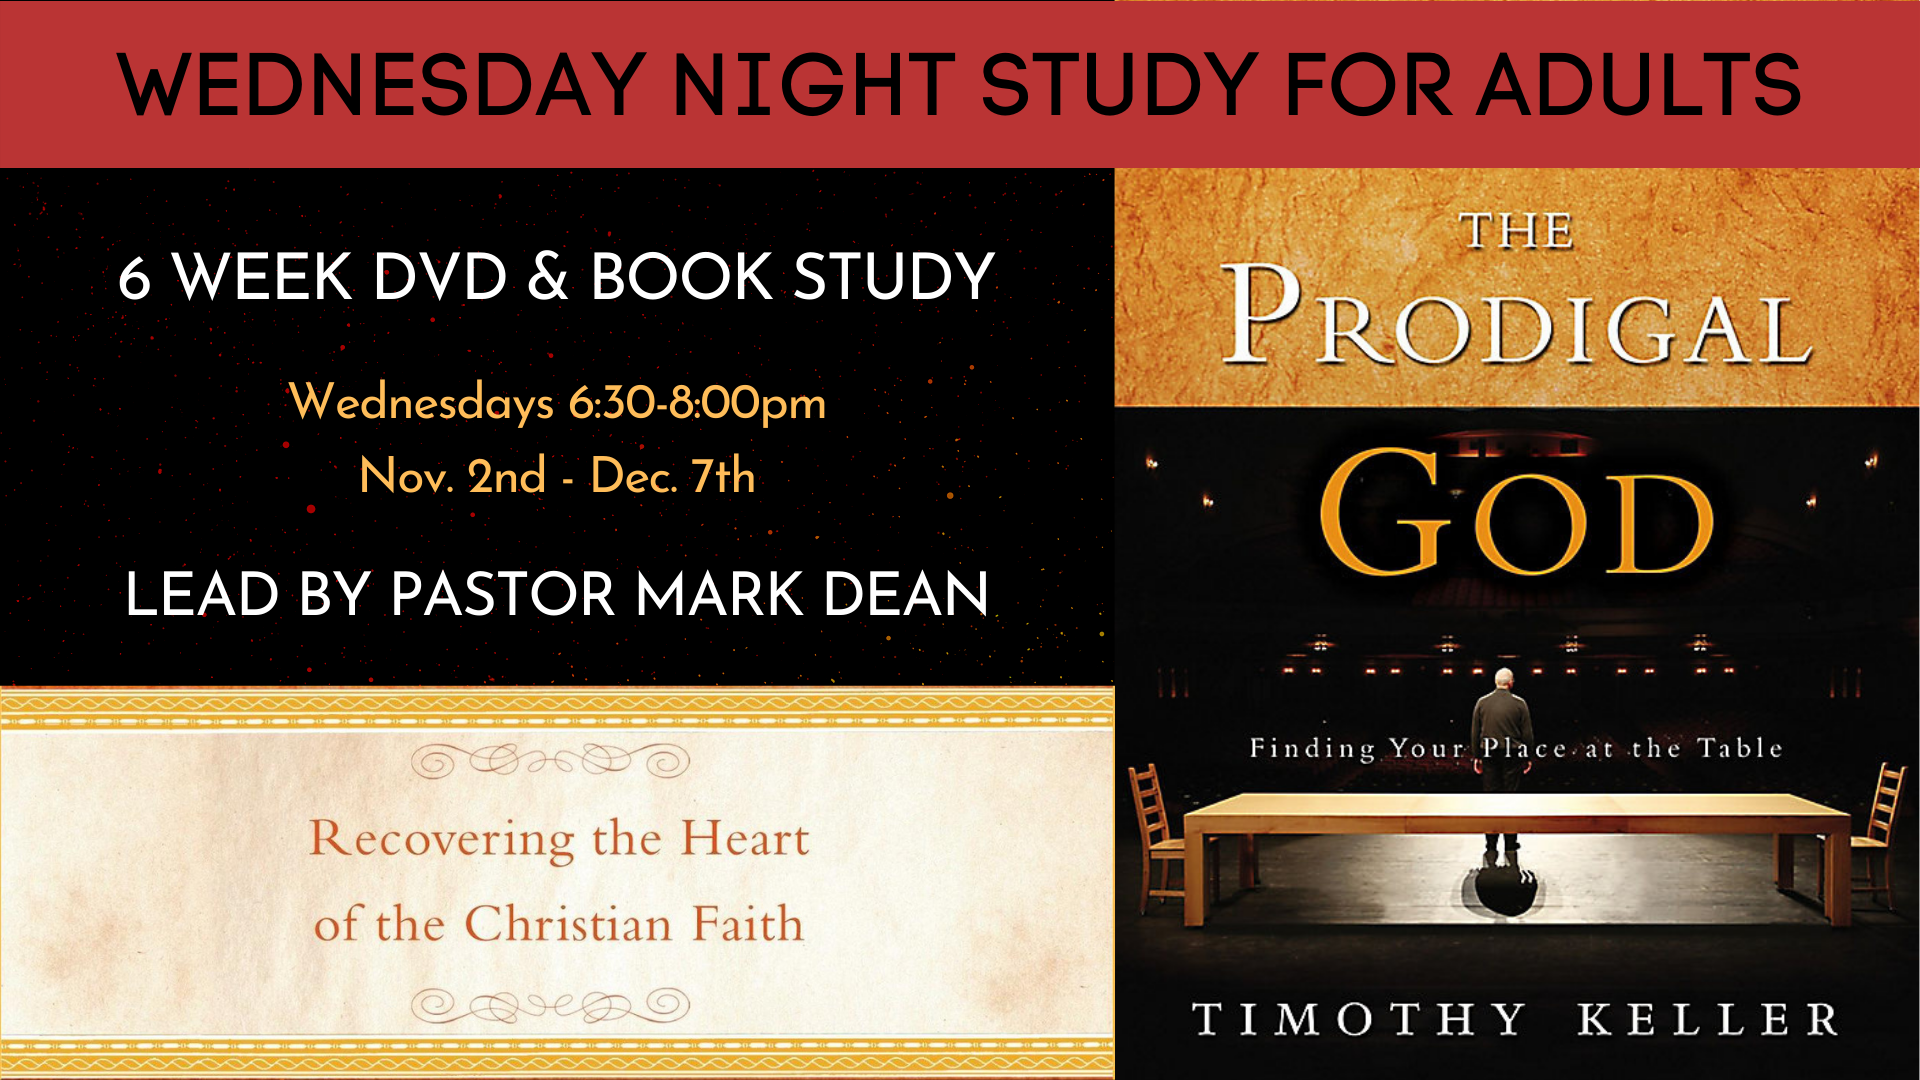 WED NIGHT STUDY FOR ADULTS – The Prodigal God